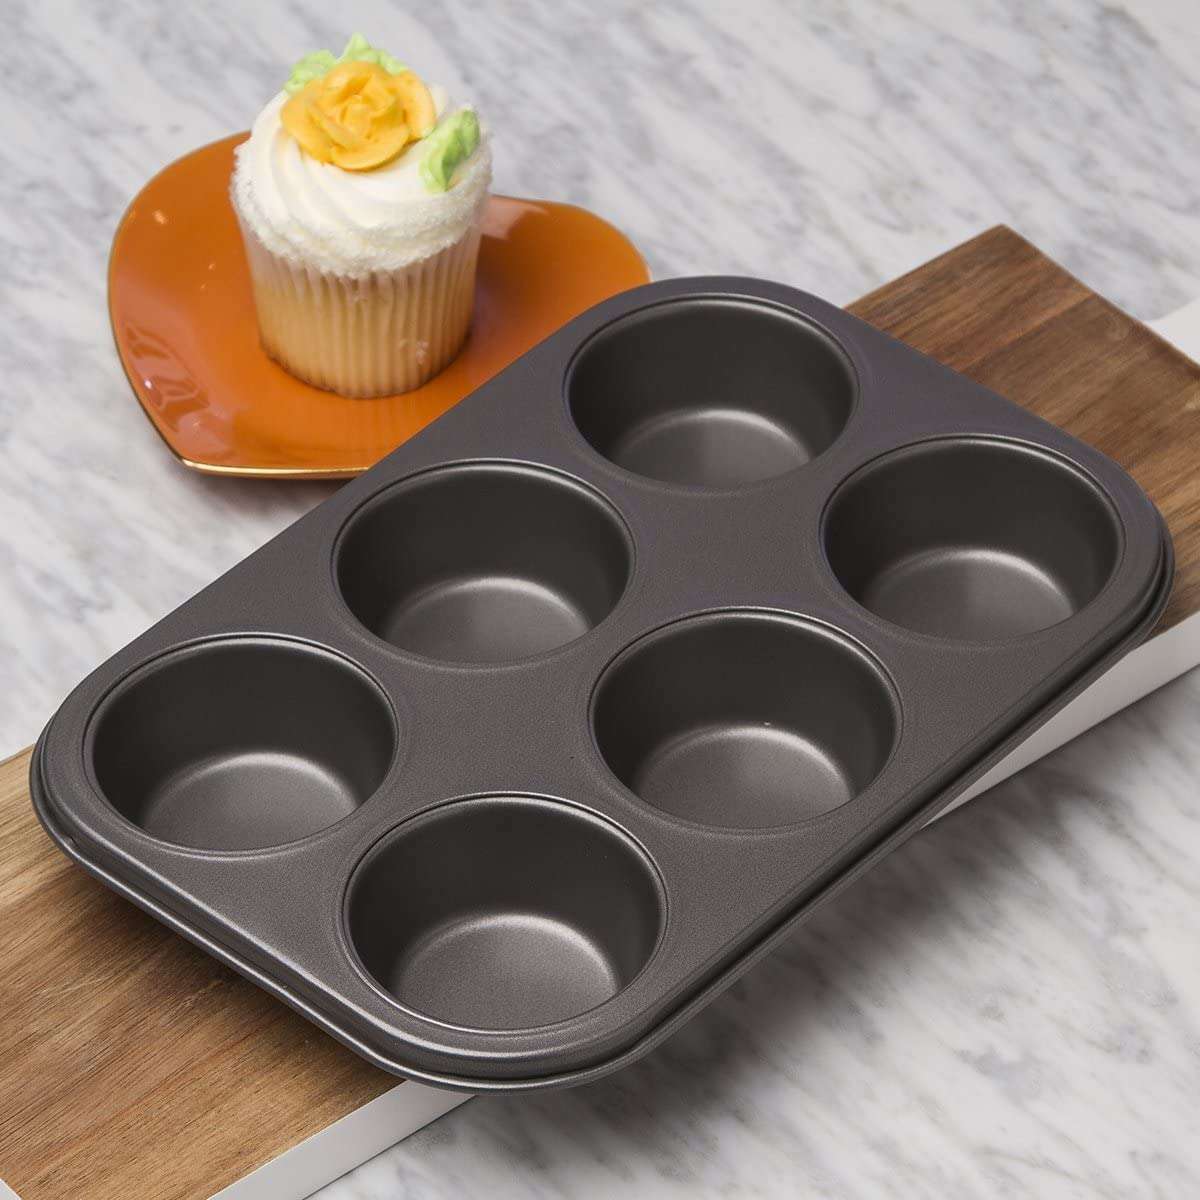 Ecolution Bakeins XL 6 Cup Muffin and Cupcake Pan PFOA, BPA, and PTFE Free Non-Stick Coating Heavy Duty Carbon Steel